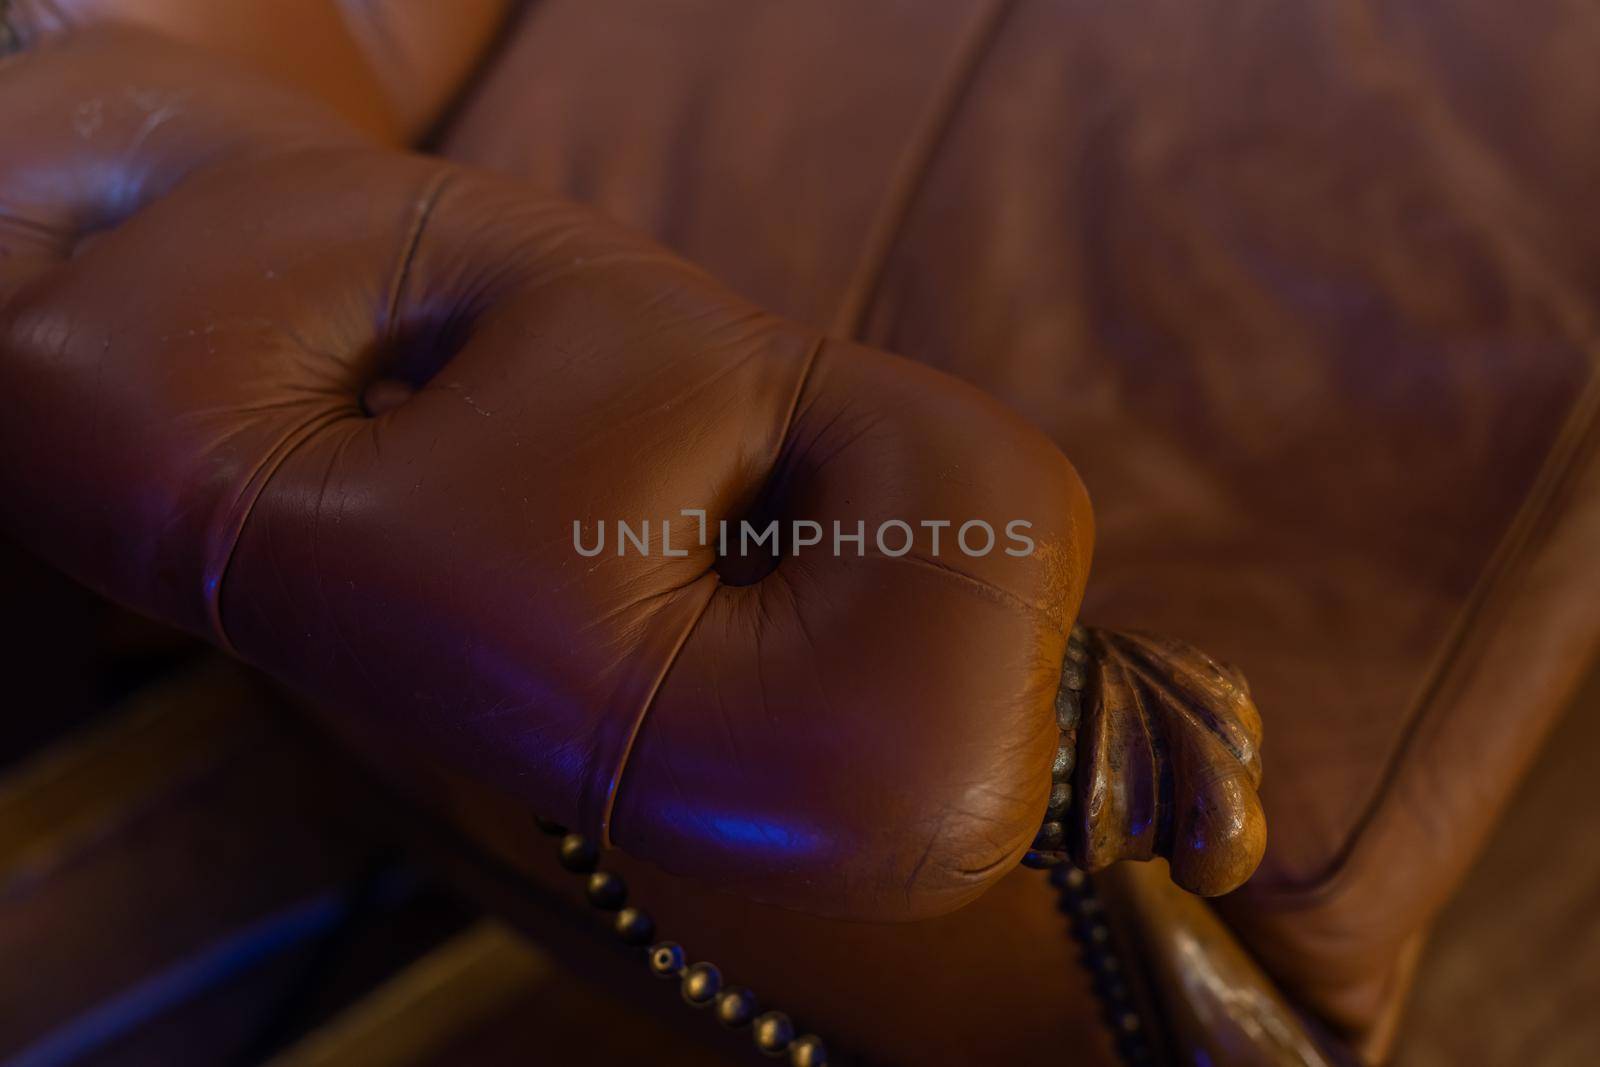 Deep brown leather luxury sofa background.